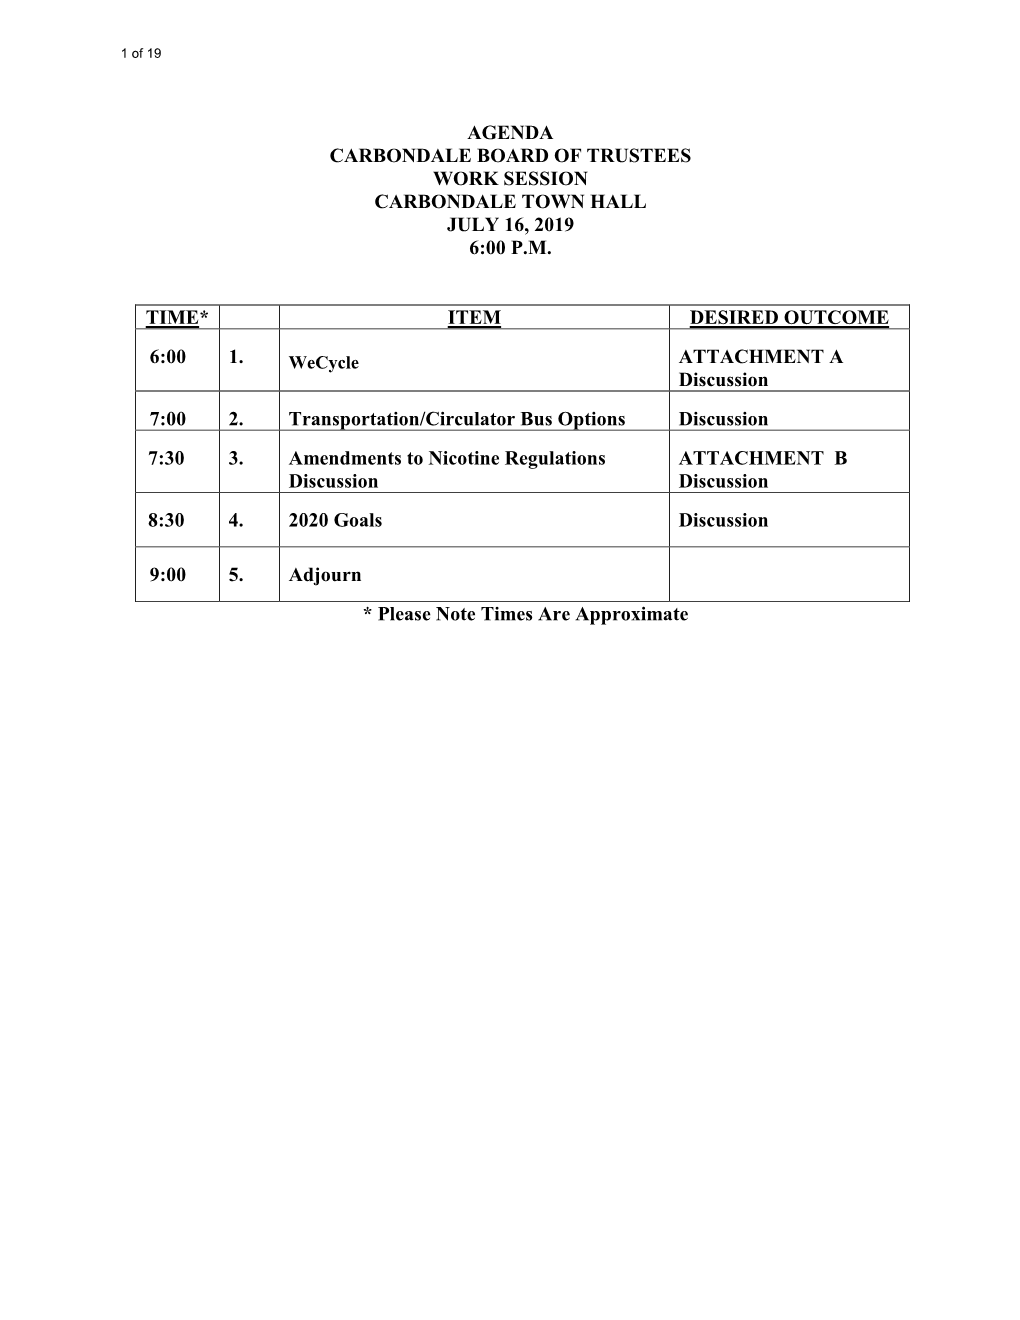 Agenda Carbondale Board of Trustees Work Session Carbondale Town Hall July 16, 2019 6:00 P.M. Time* Item Desired Outcome 6:00 1